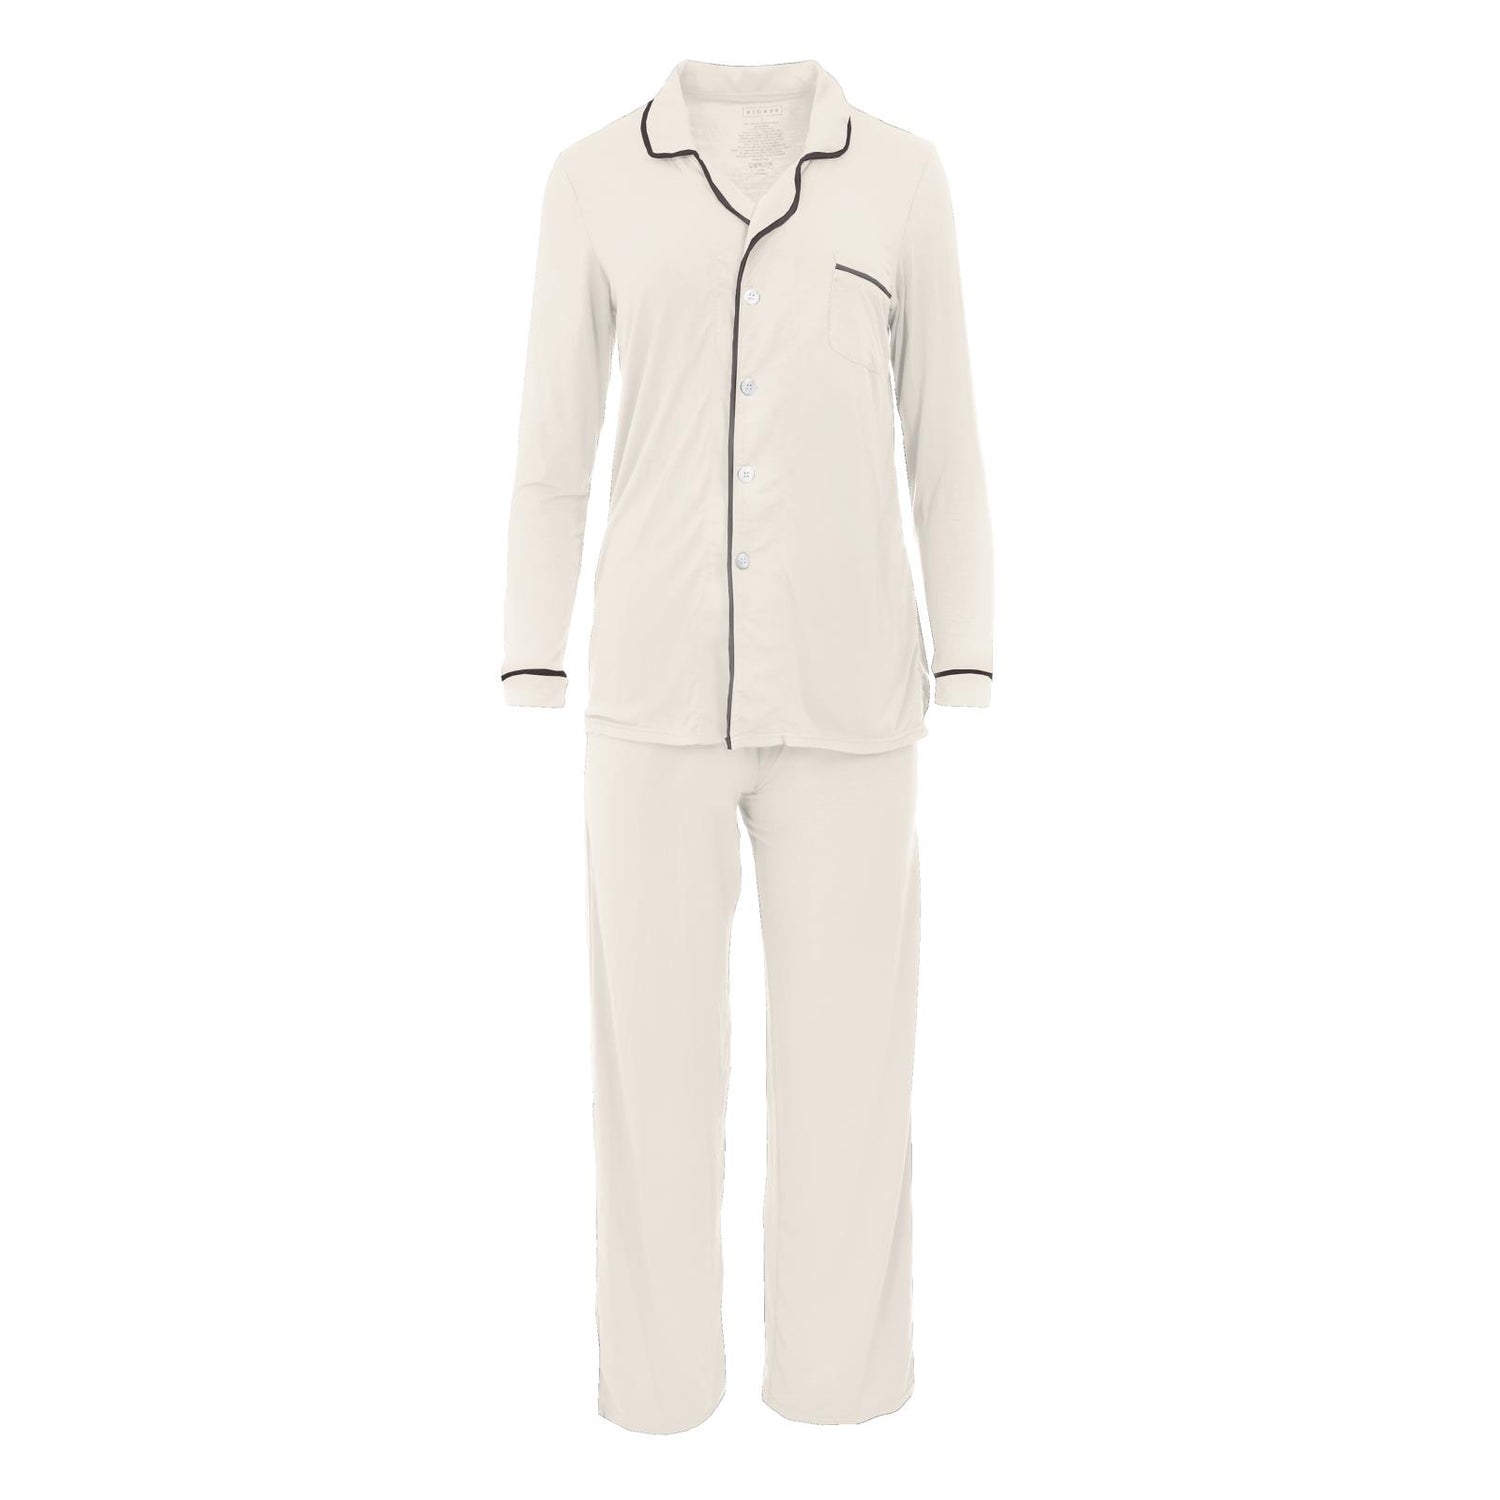 Women's Long Sleeved Collared Pajama Set in Natural with Midnight